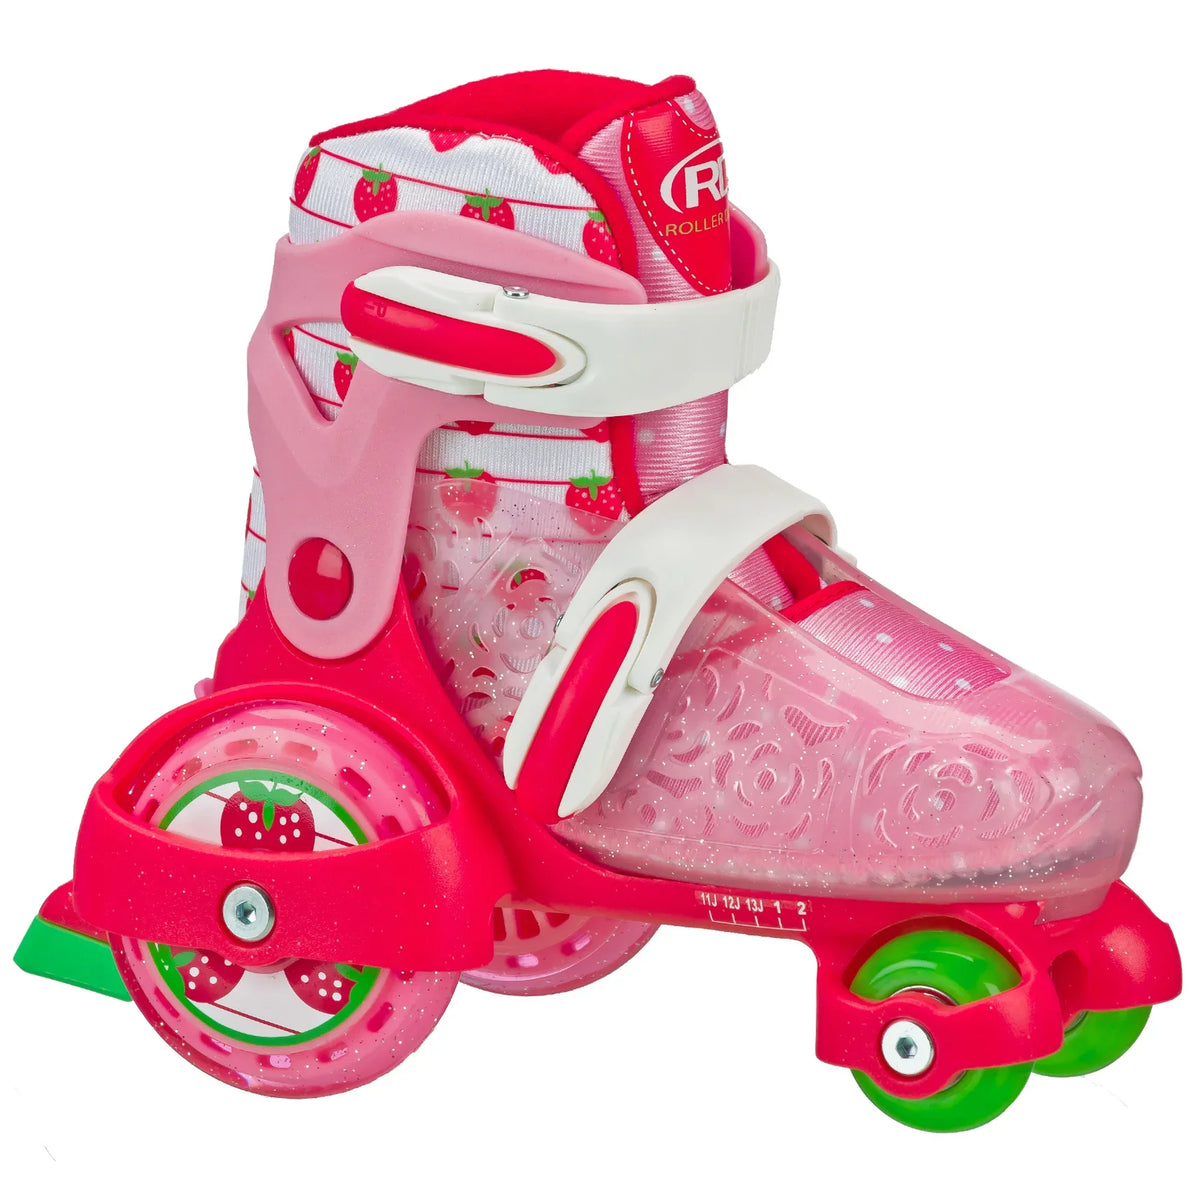 Adjustable Roller Skates - Quad Skates for Kids That Grow with Them Page 2  - Skate Society